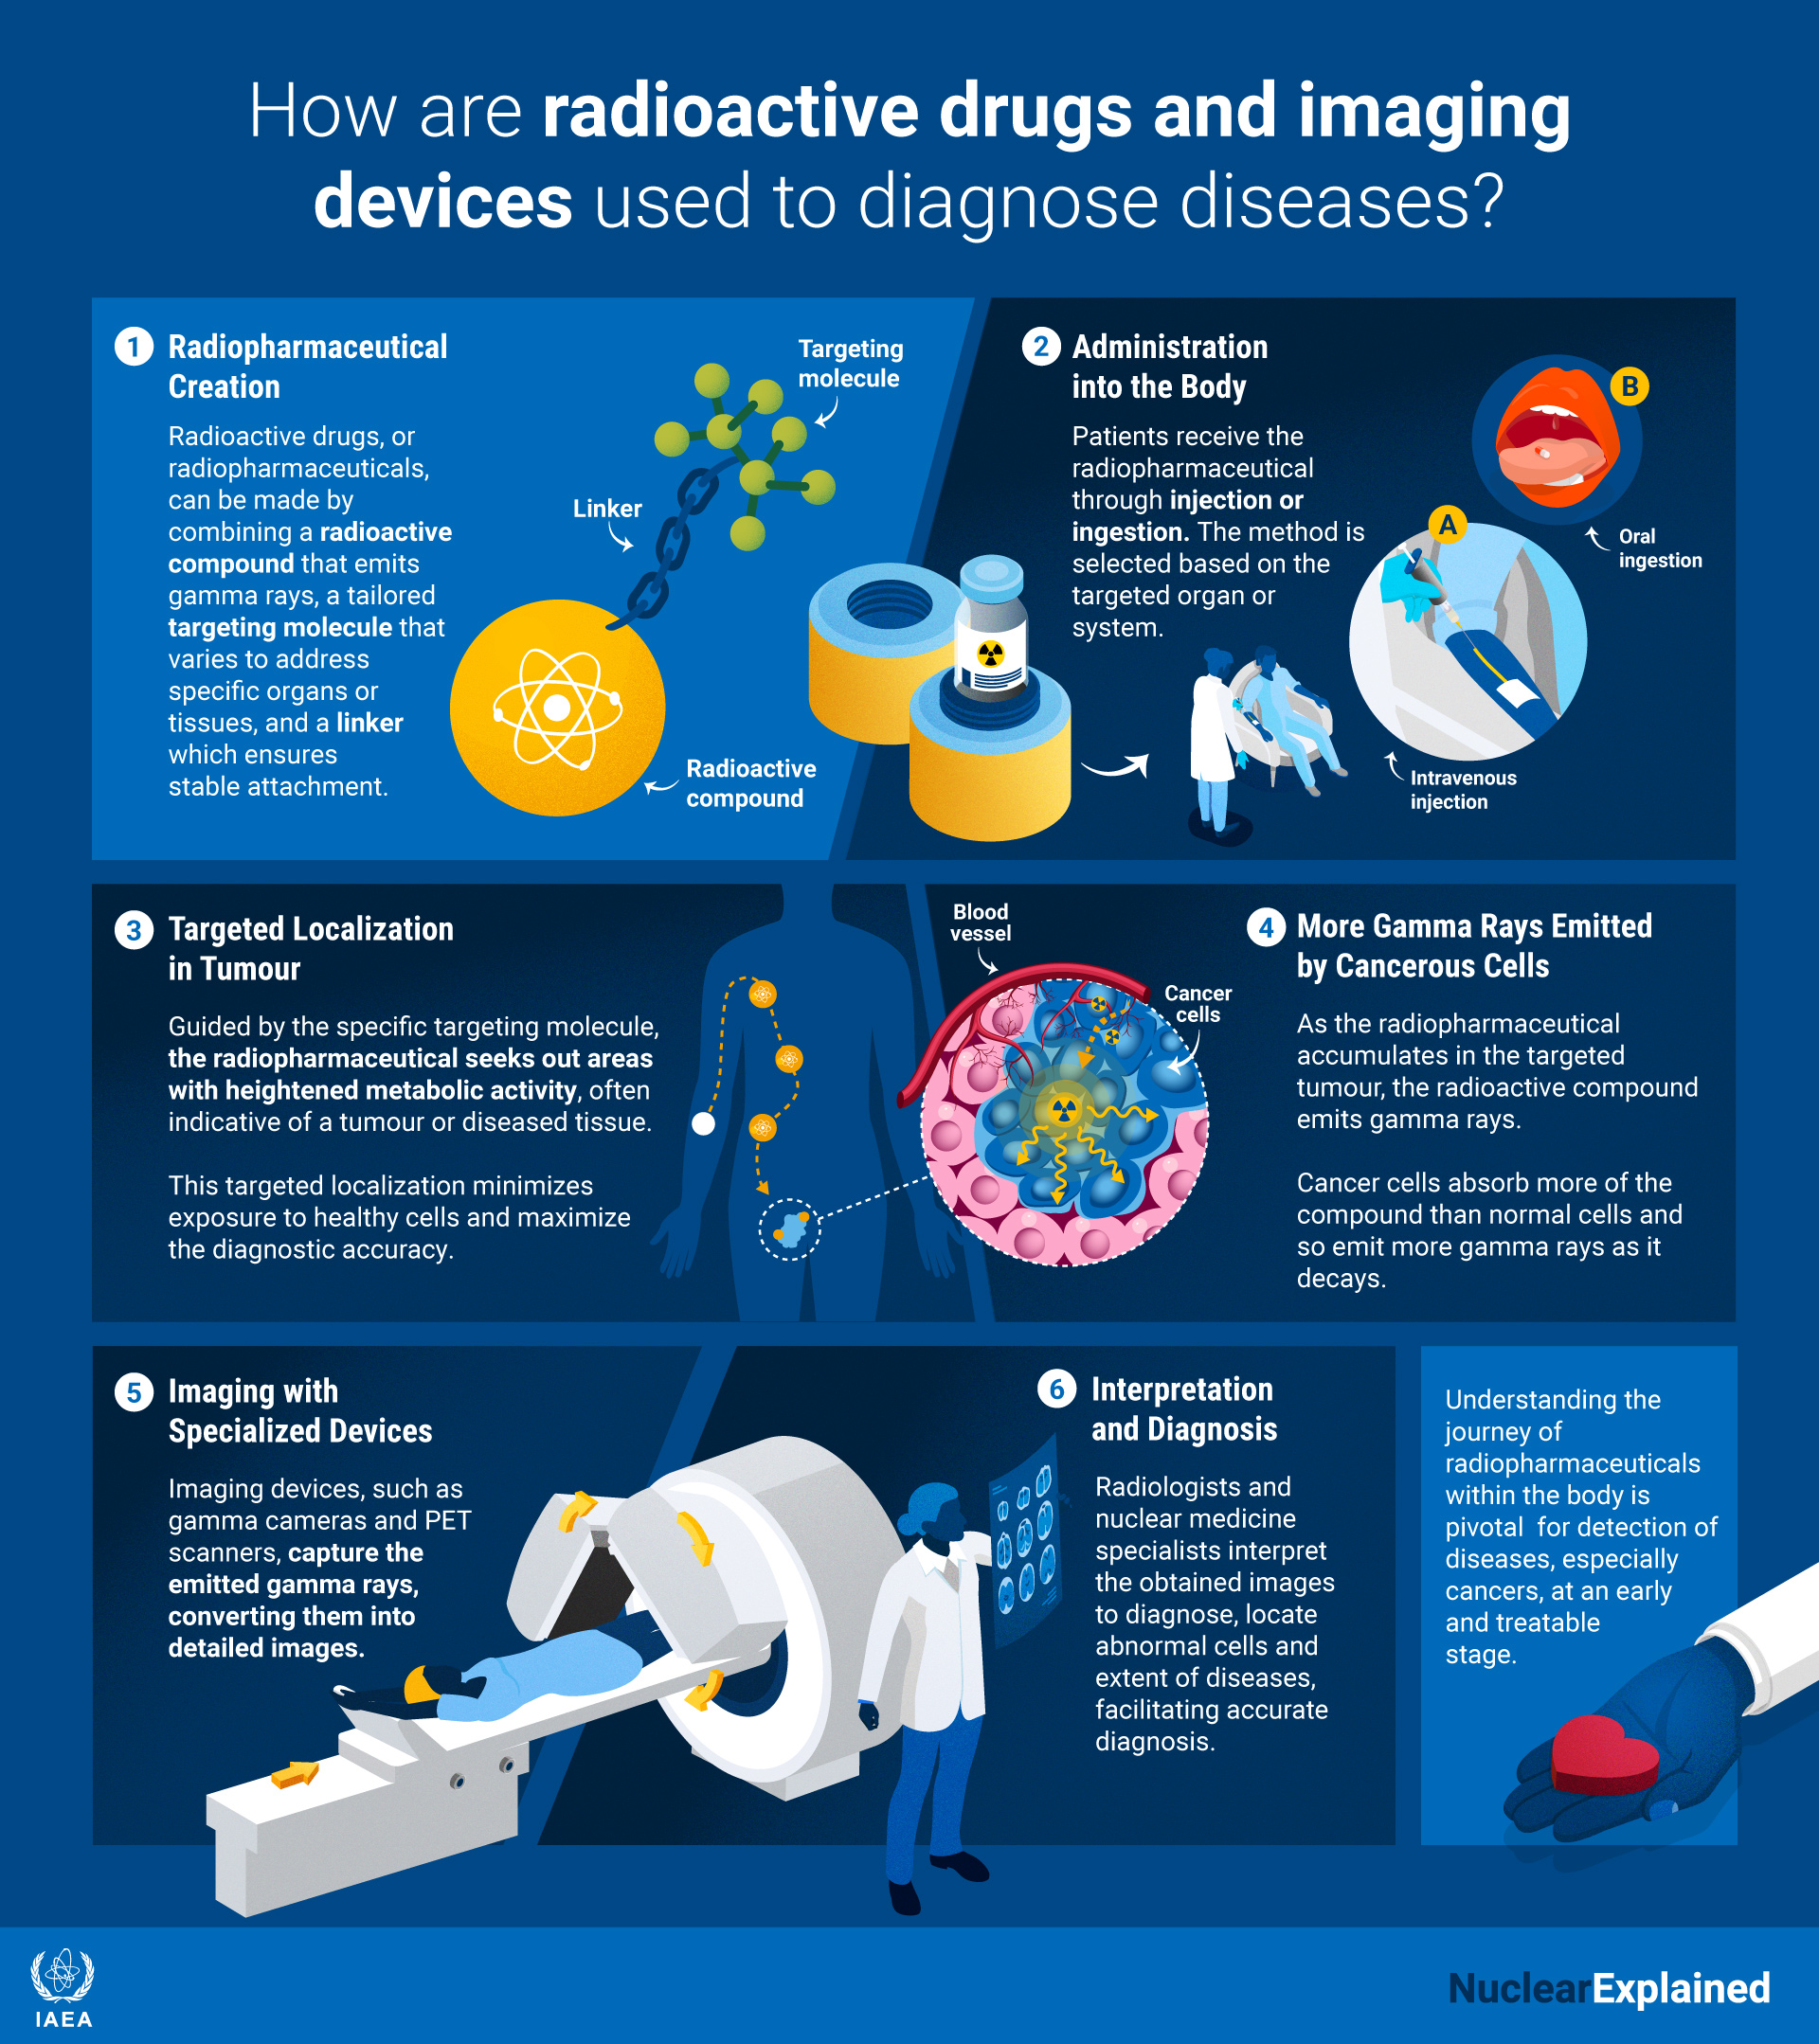 An infographic showing how radiopharmaceuticals are used in diagnosis